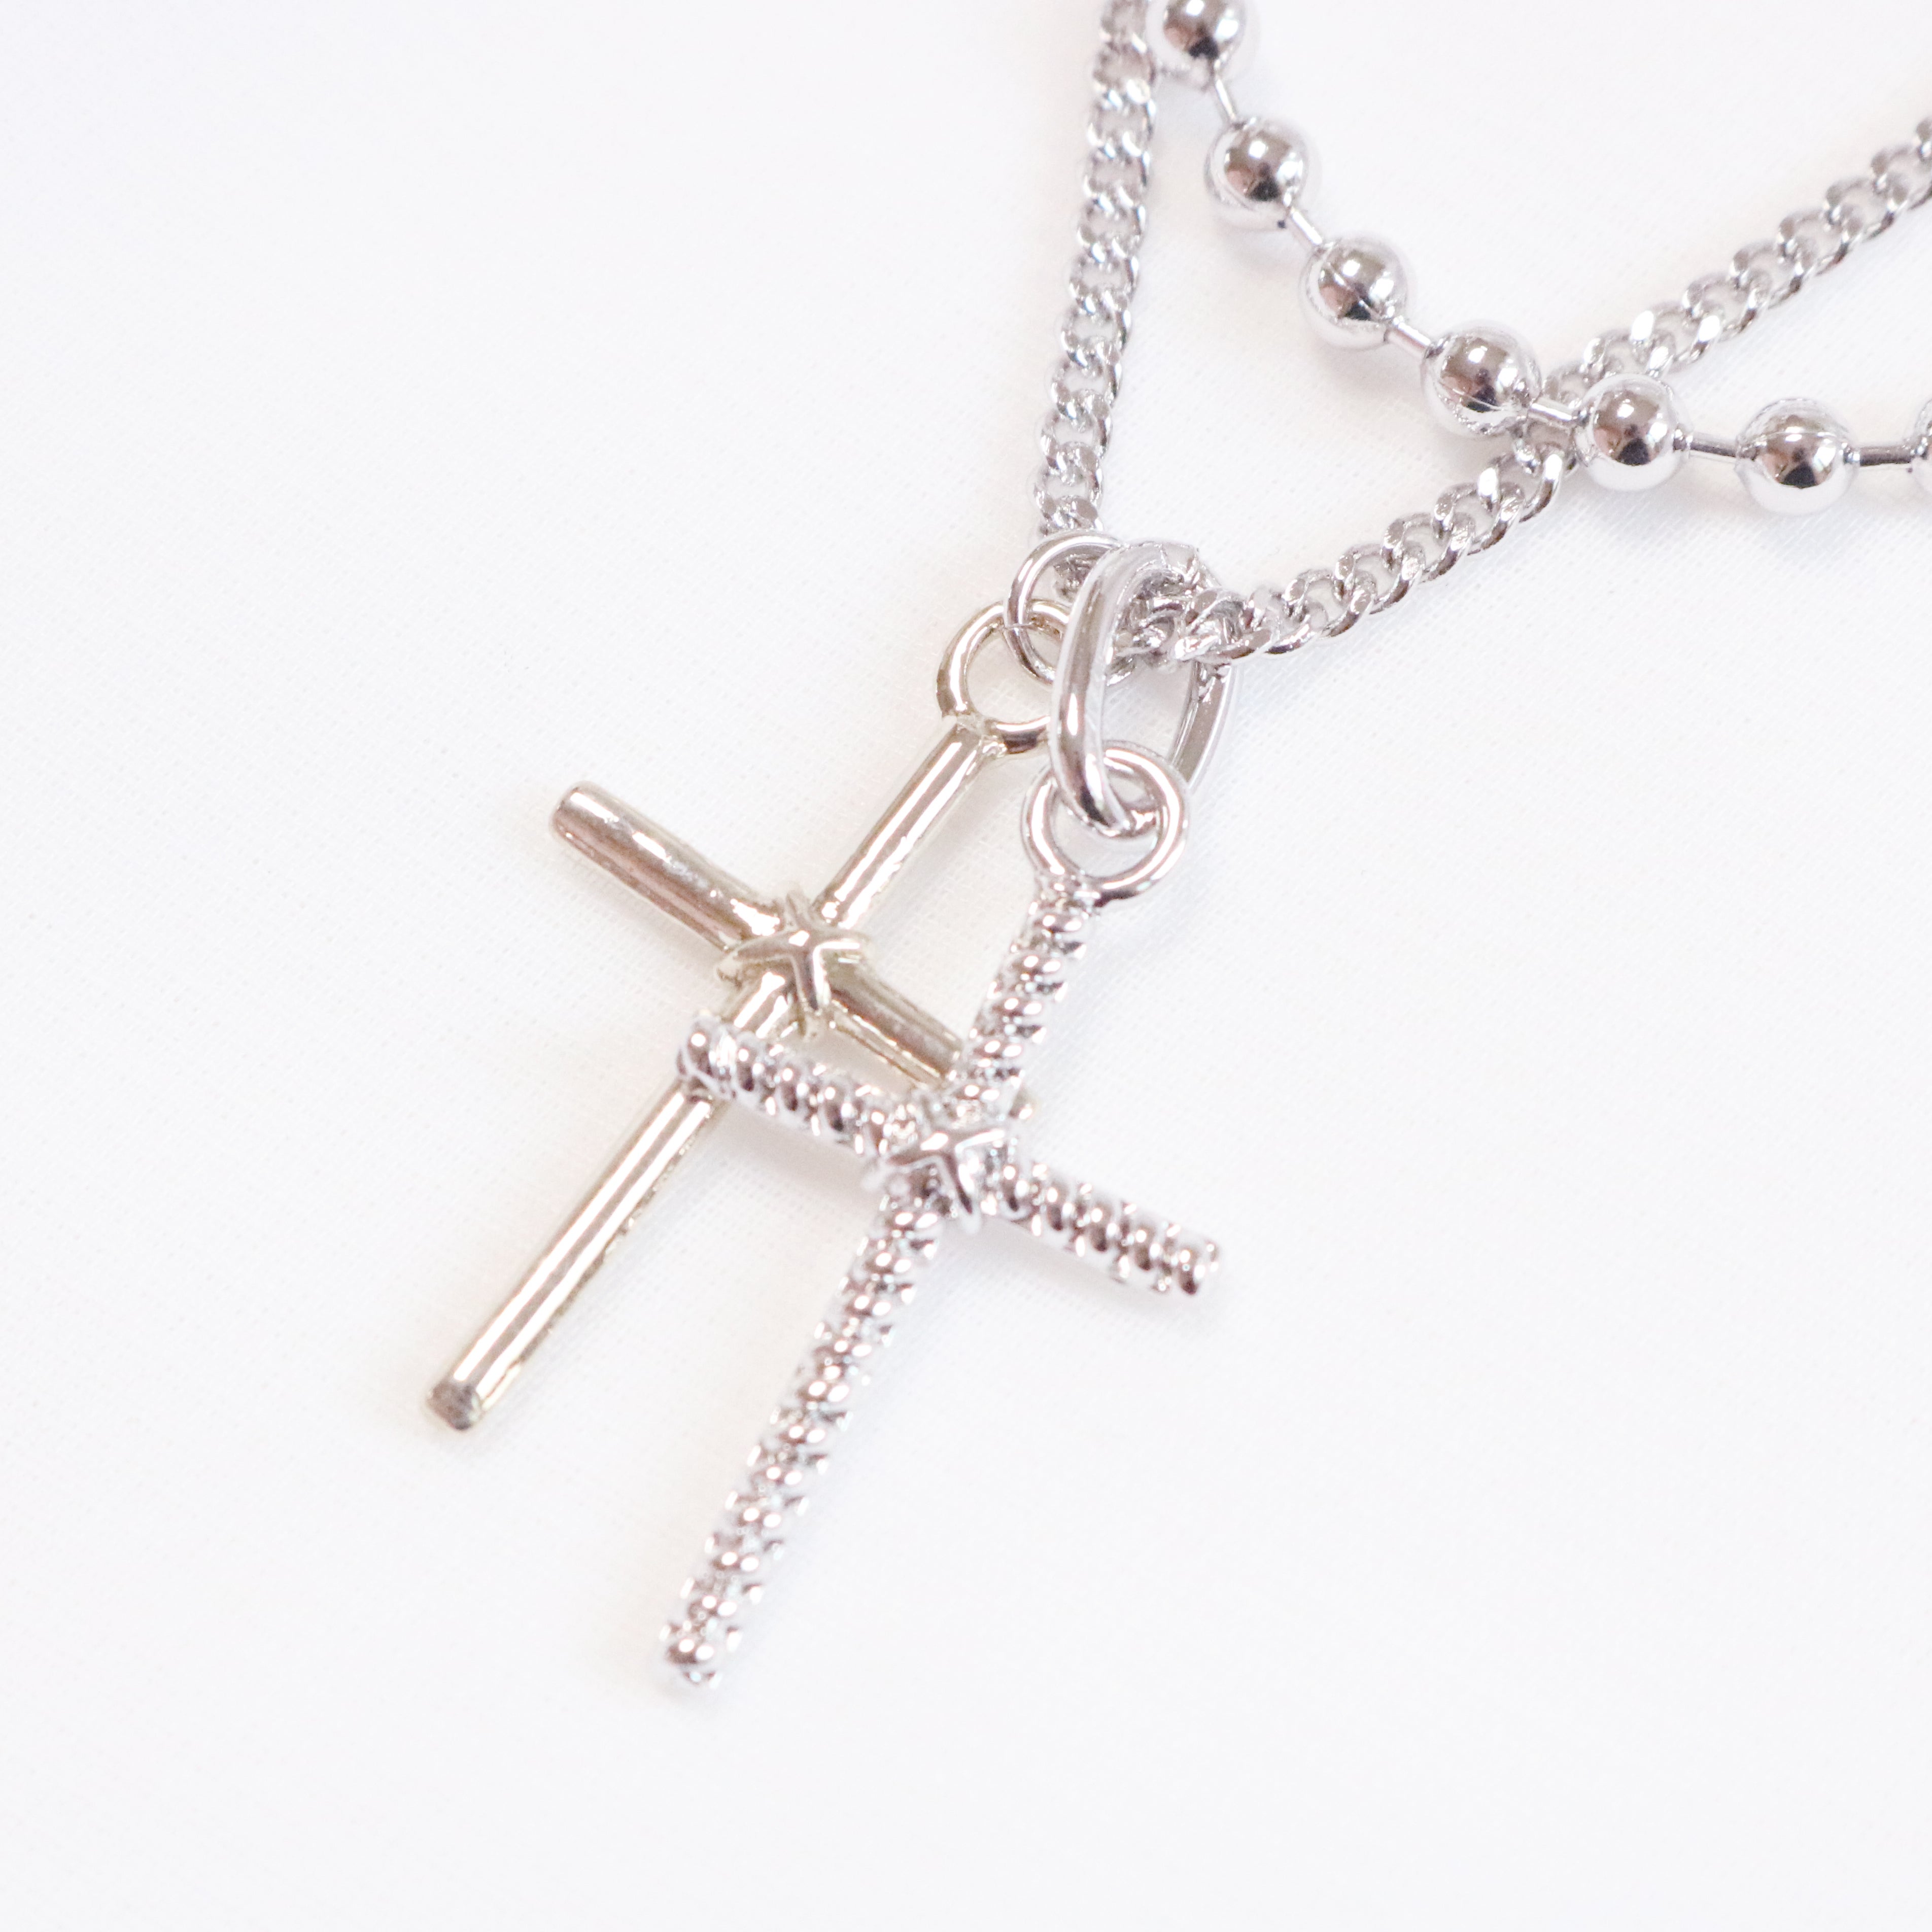 Double cross layered necklace